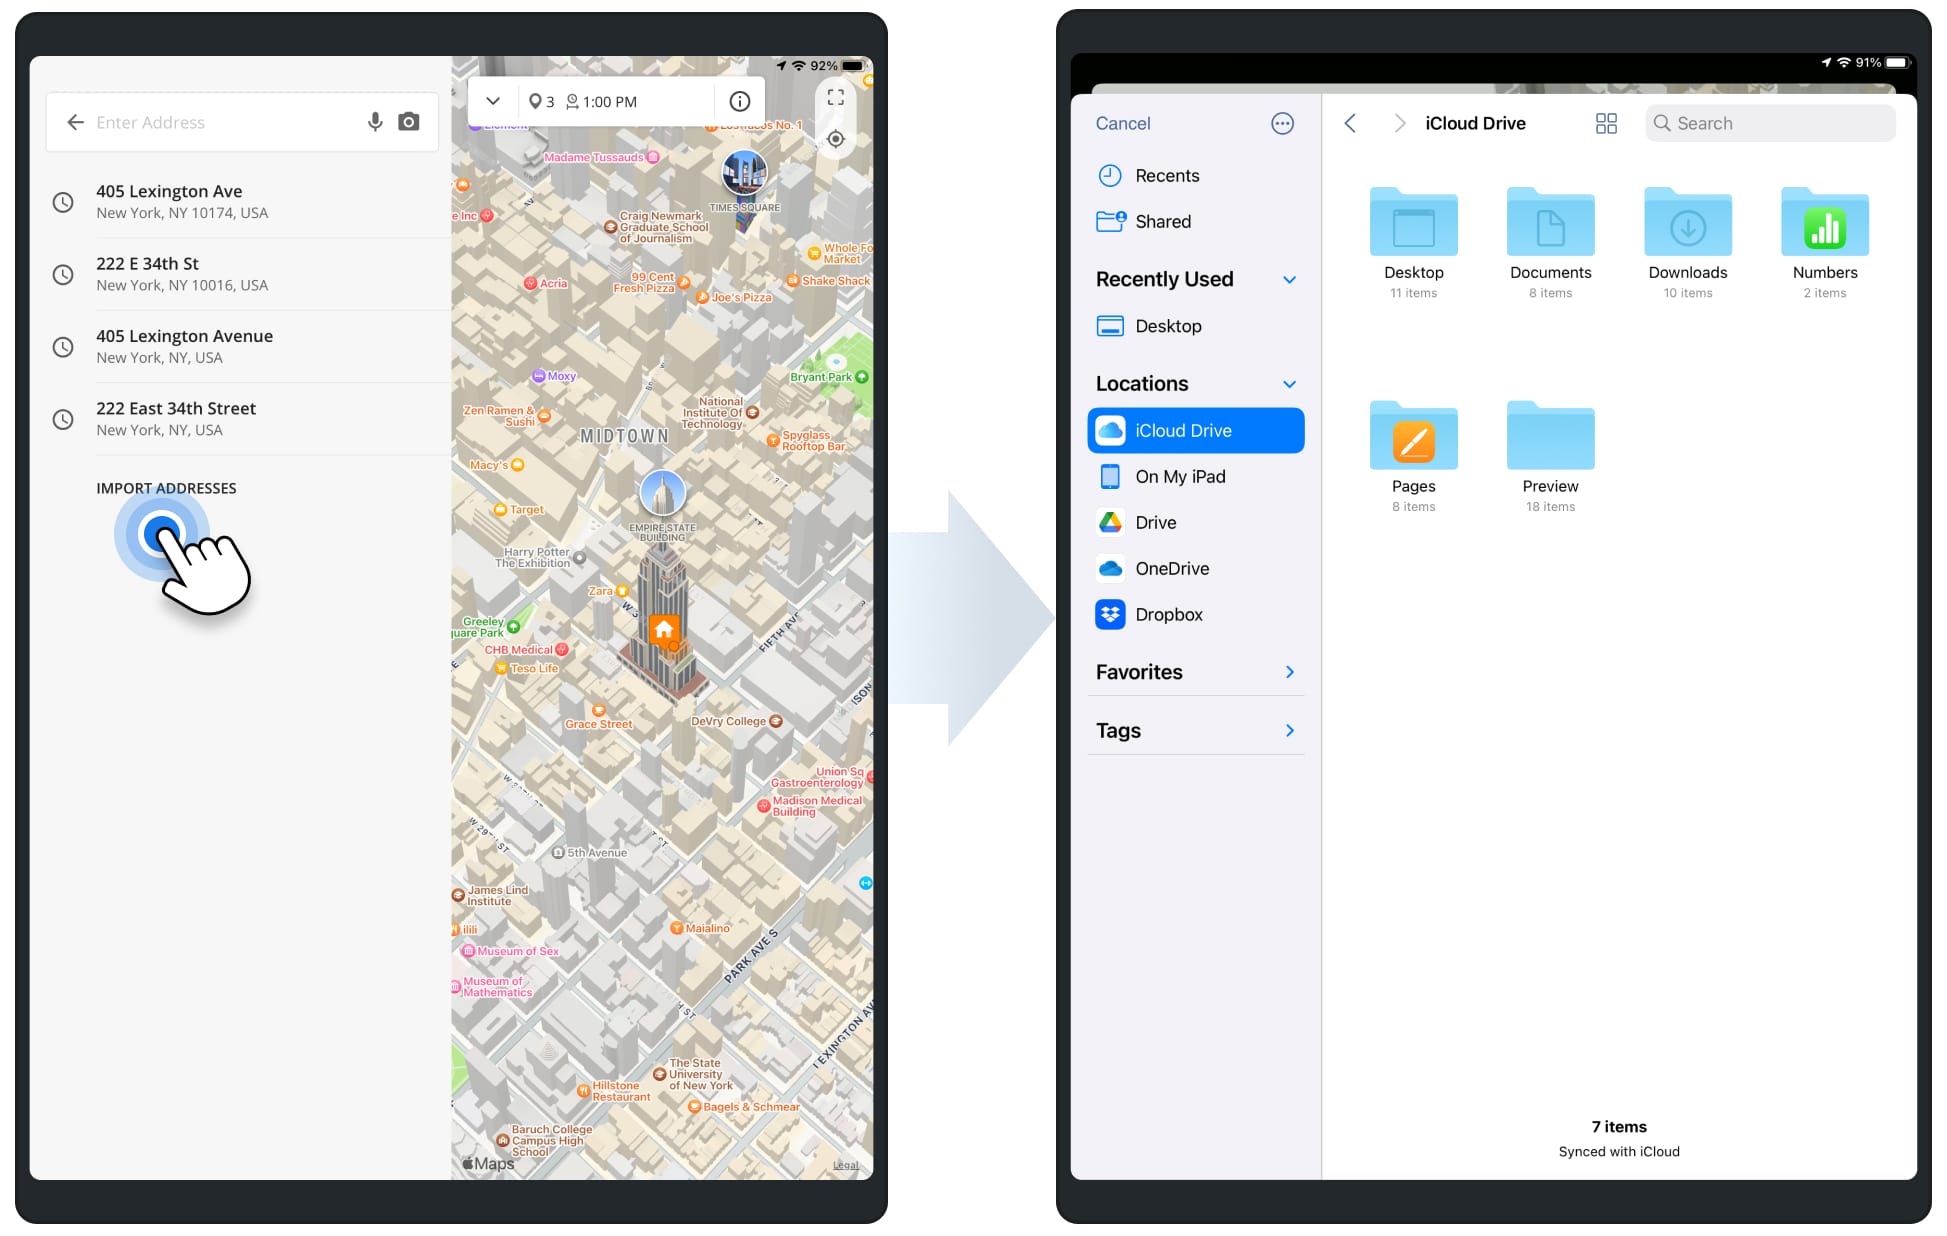 Importing a CSV or XLS spreadsheet with route addresses from iPad, iCloud, Google Drive, OneDrive, or Dropbox into the Route Planner app.